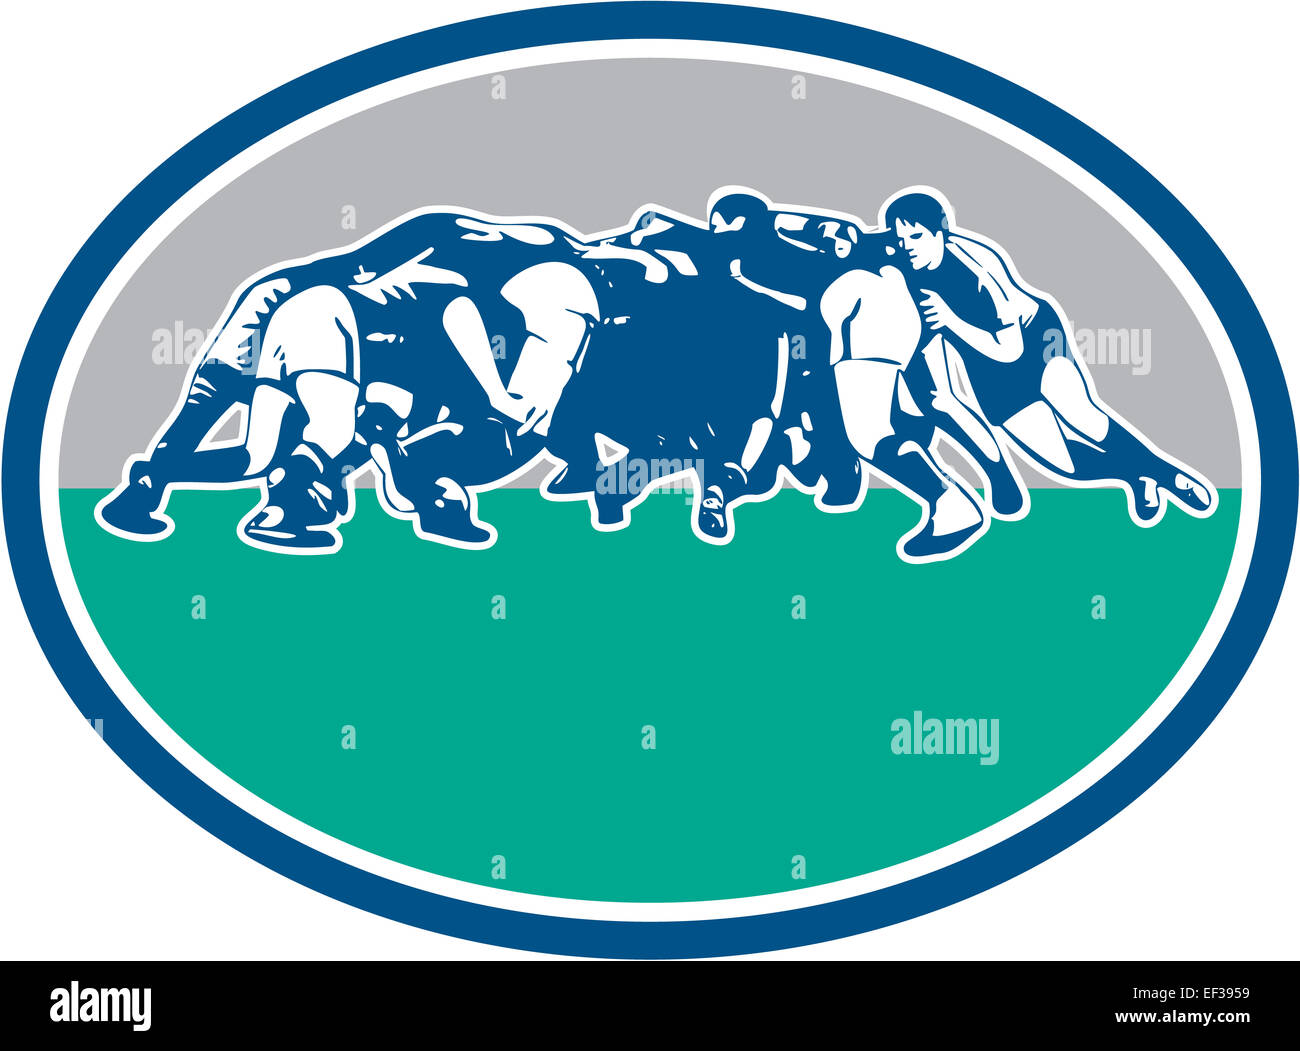 Illustration of rugby union players in a scrum set inside oval with done in retro style. Stock Photo